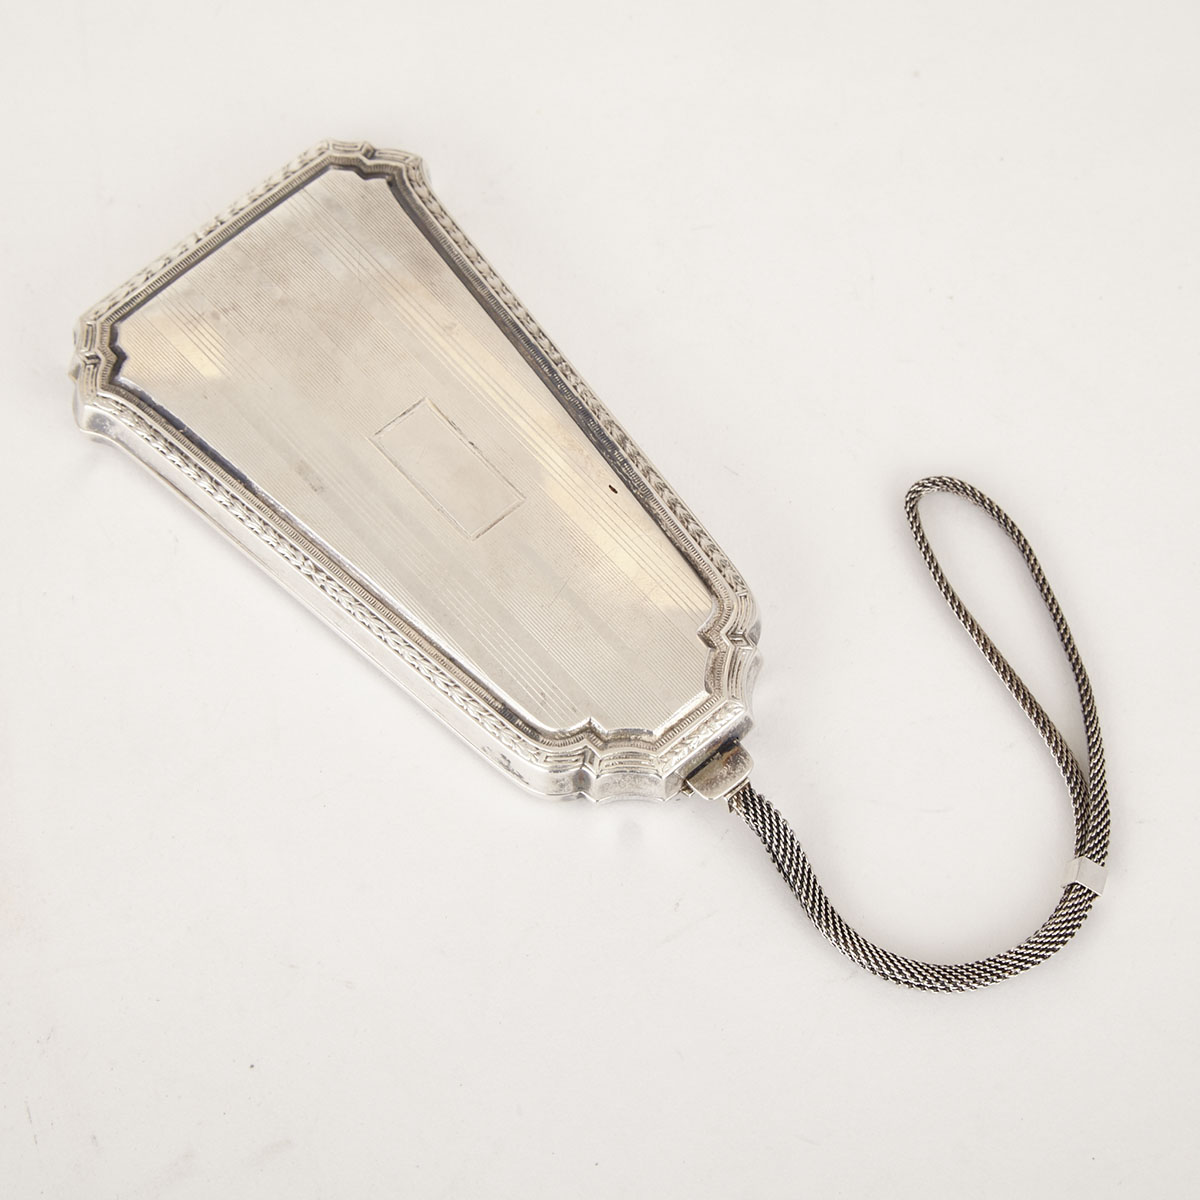 American Silver Ladies Evening Bag, Webster Co., North Attleboro, Mass., early 20th century